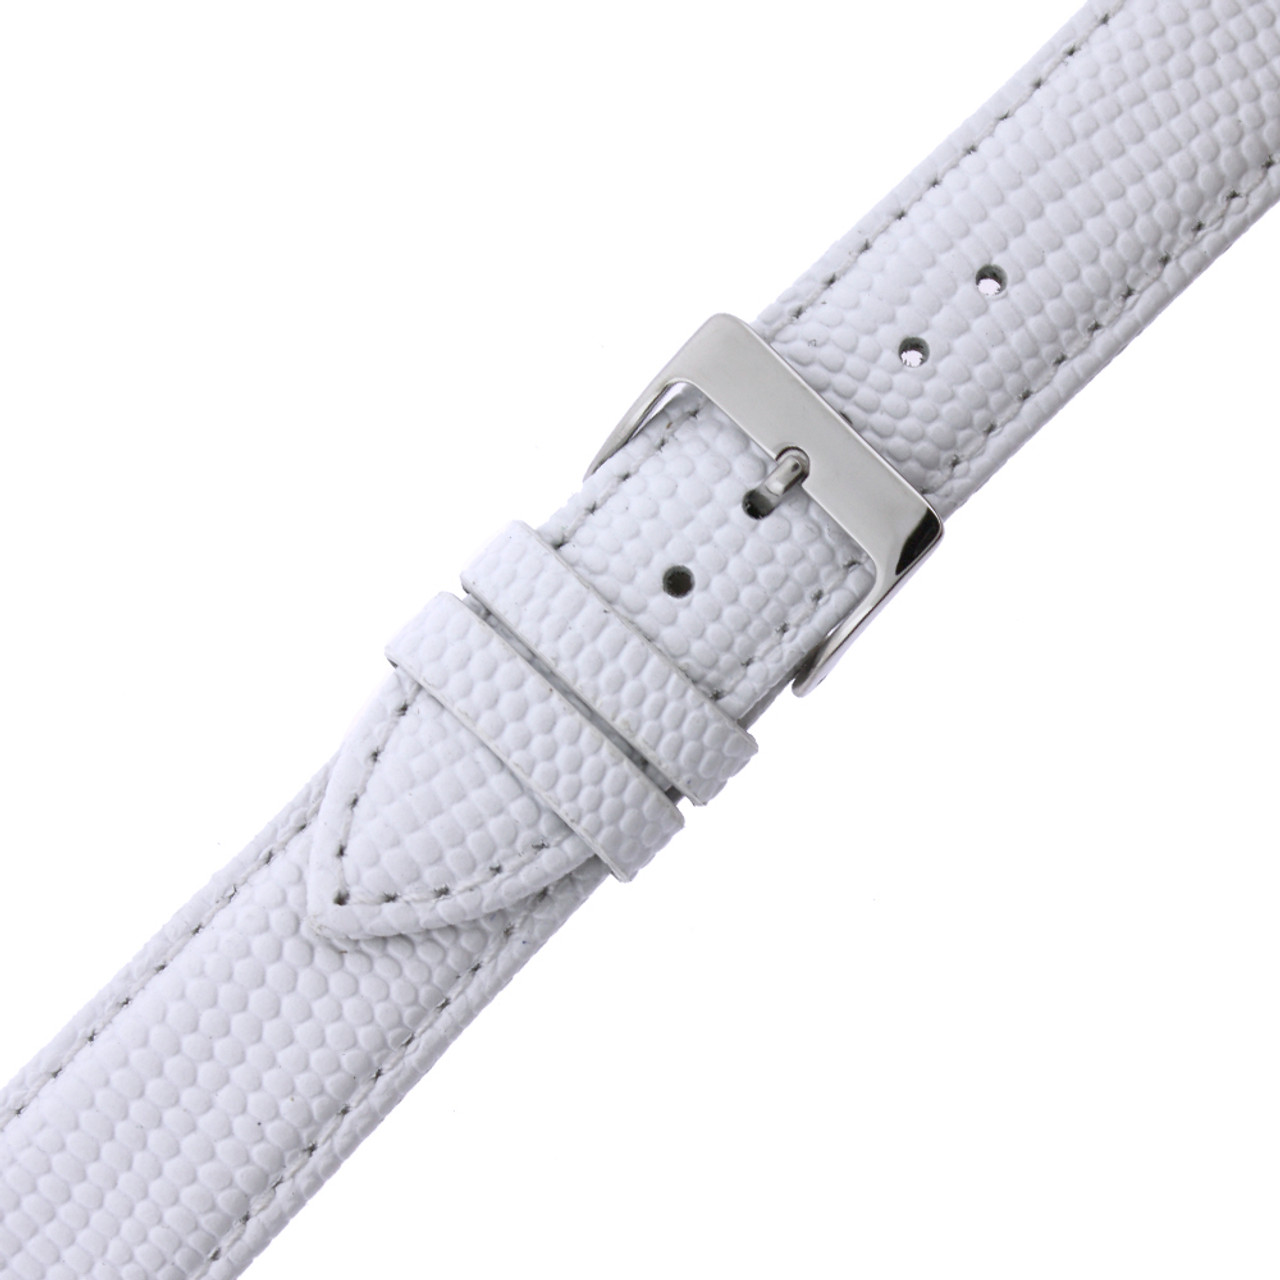 Watch Band Genuine Leather Lizard Grain White Quick Release Built-in Pins - Main